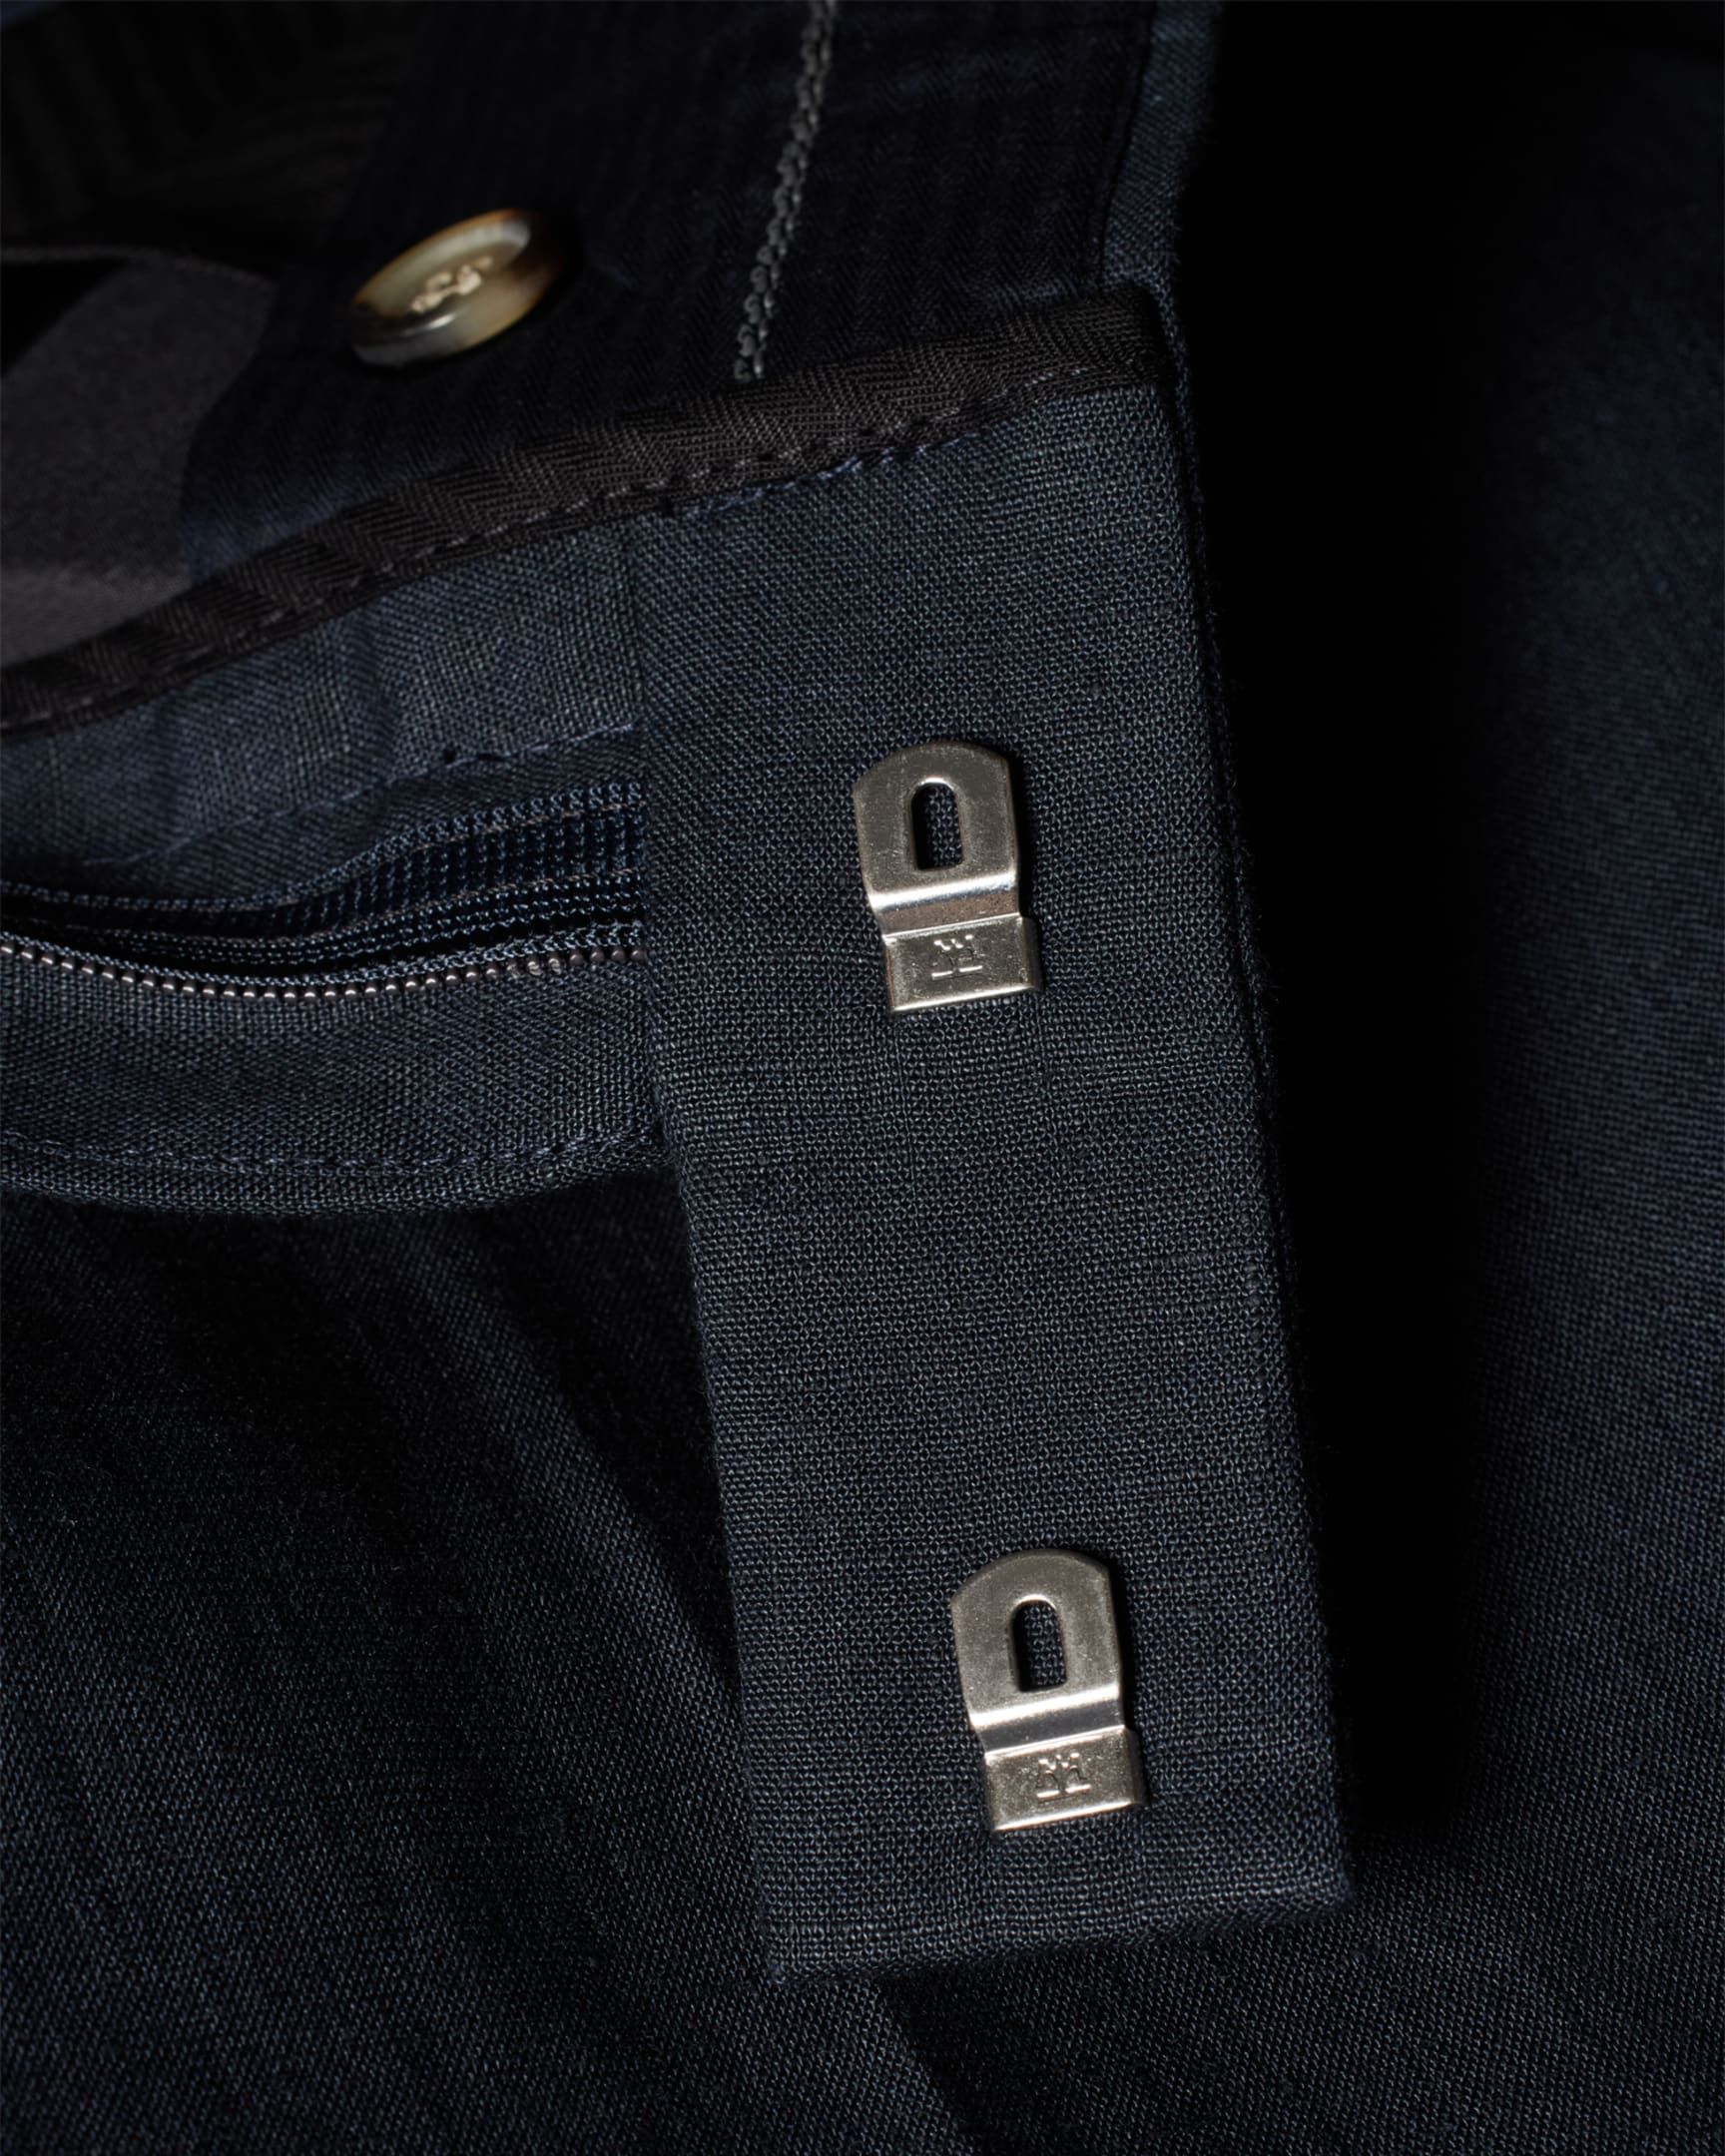 Detail View - Navy Linen Trousers Paul Smith